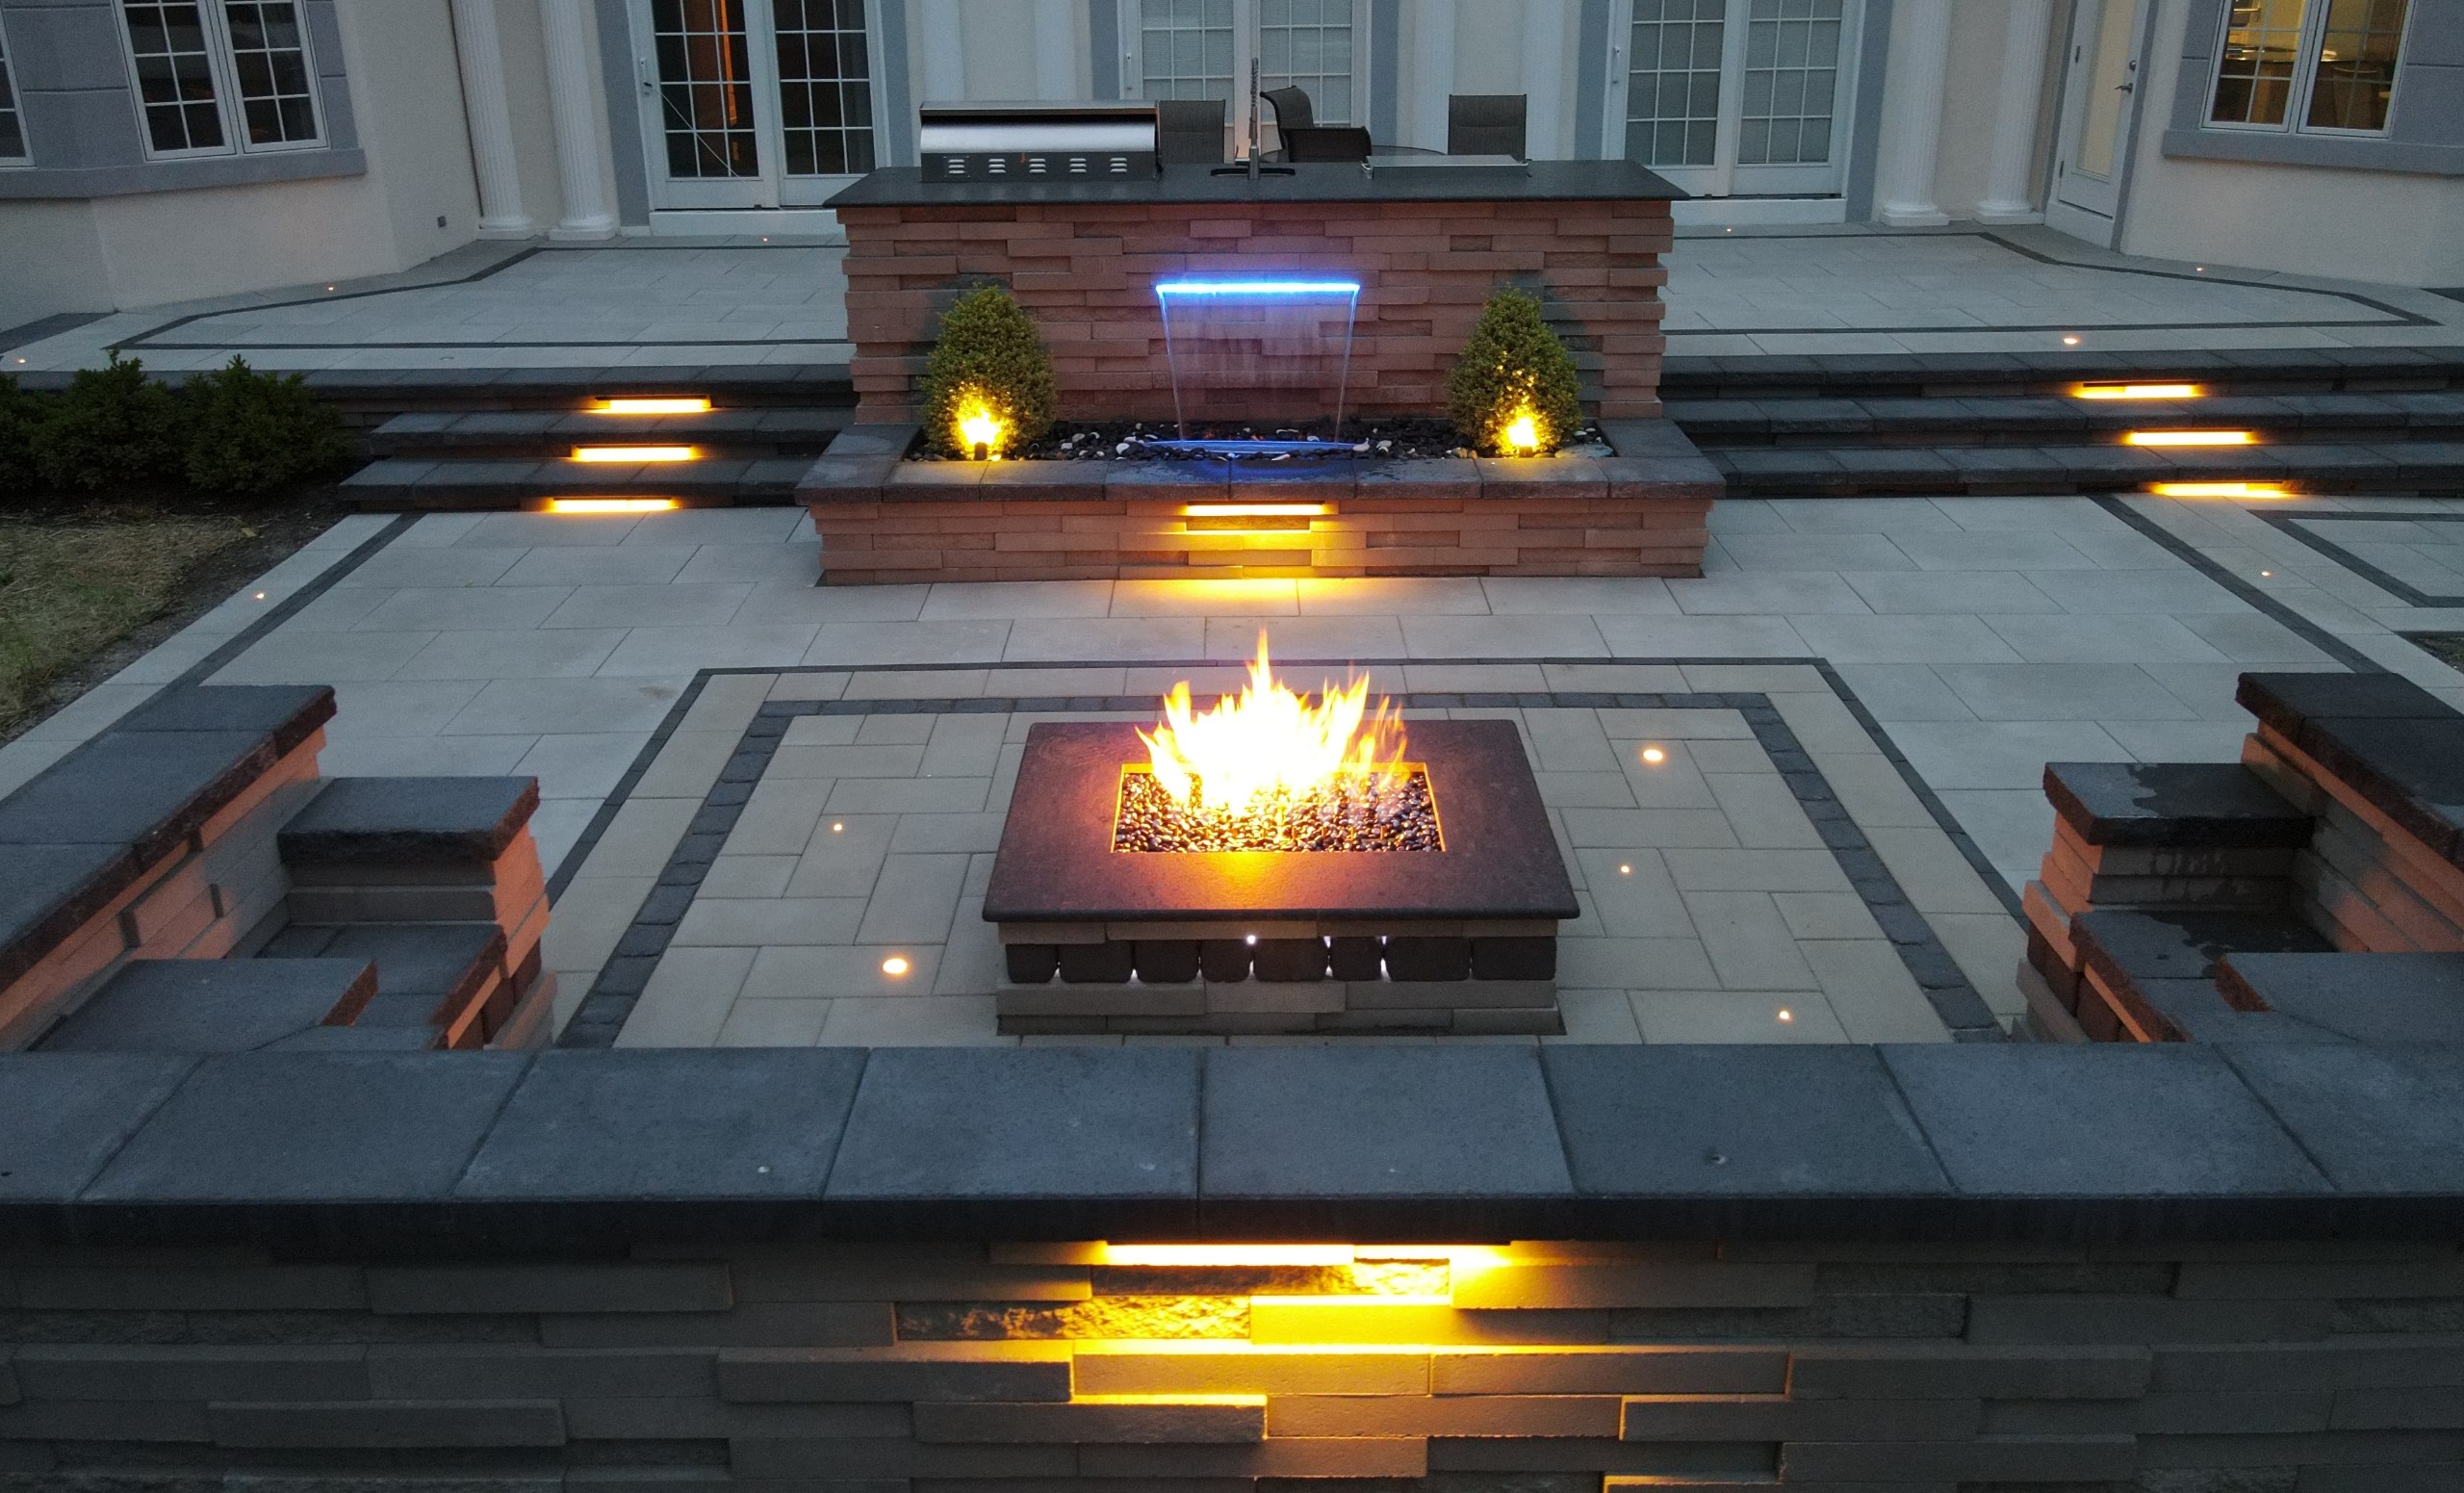 landscape design/build firm in Bellevue installed a paver patio with charcoal border, landscape lighting, firepit, water feature, block wall, sitting wall, and pavers patio